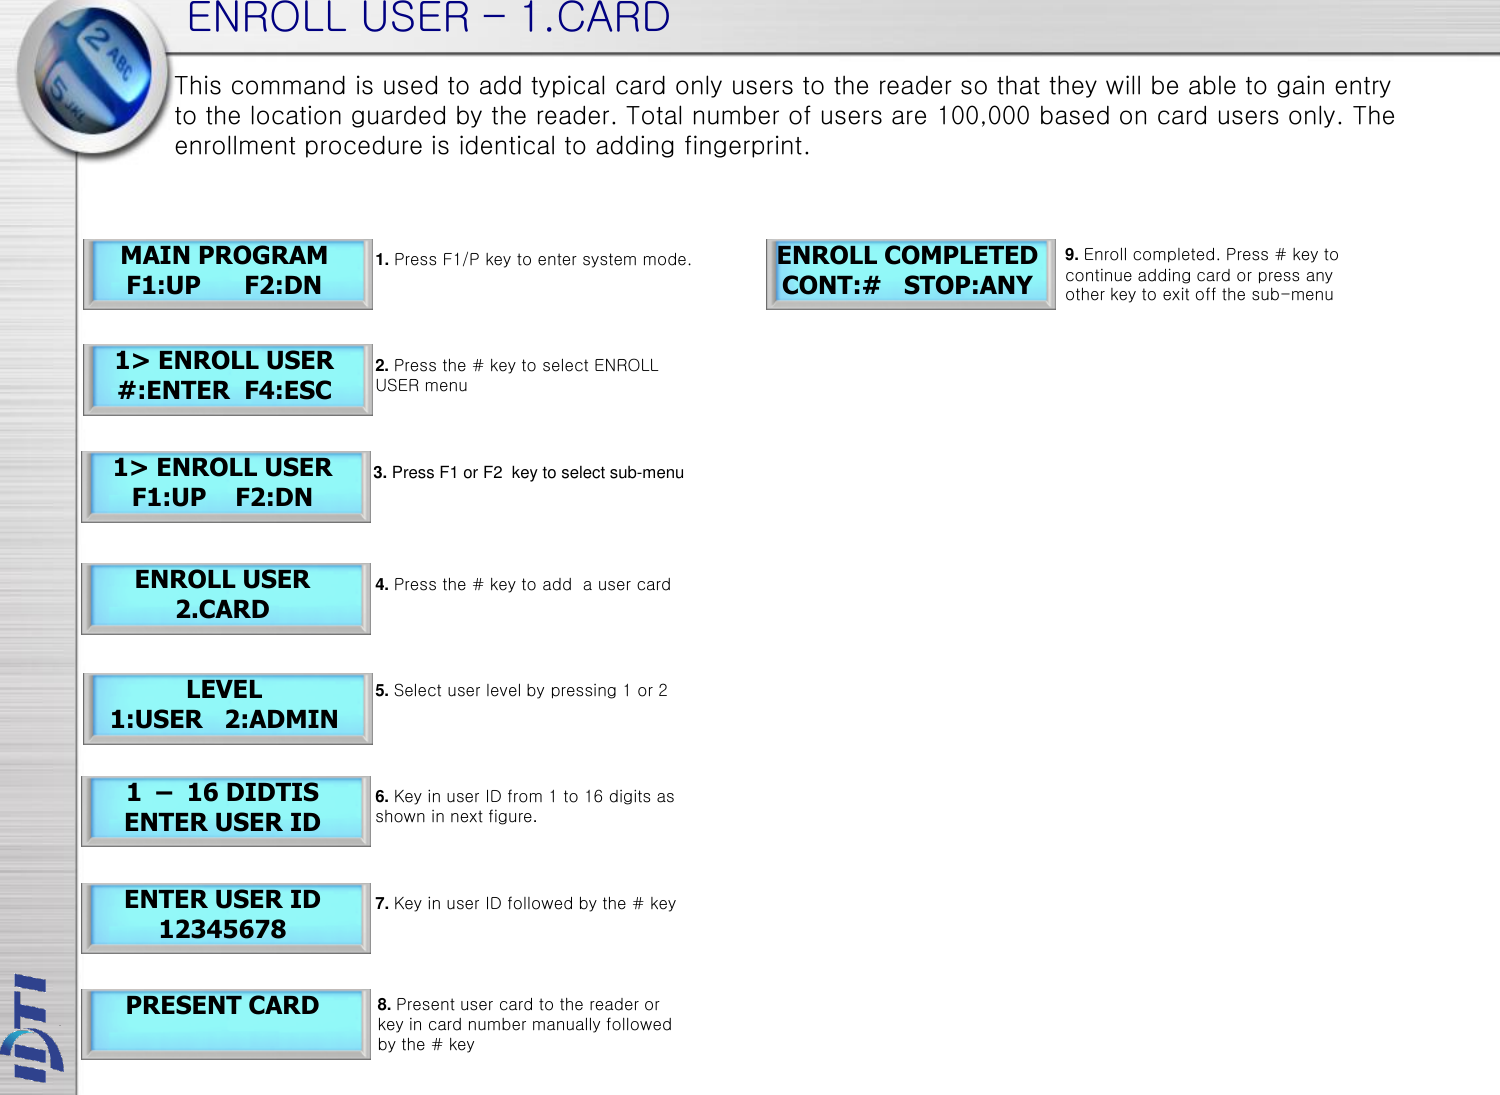 ENROLL USER – 1.CARD 1  –  16 DIDTIS ENTER USER ID ENTER USER ID 12345678 PRESENT CARD ENROLL COMPLETED CONT:#   STOP:ANY ENROLL USER 2.CARD This command is used to add typical card only users to the reader so that they will be able to gain entry to the location guarded by the reader. Total number of users are 100,000 based on card users only. The enrollment procedure is identical to adding fingerprint. MAIN PROGRAM F1:UP      F2:DN 1&gt; ENROLL USER #:ENTER  F4:ESC 1&gt; ENROLL USER F1:UP    F2:DN 1. Press F1/P key to enter system mode. 2. Press the # key to select ENROLL USER menu 4. Press the # key to add  a user card 6. Key in user ID from 1 to 16 digits as shown in next figure.  7. Key in user ID followed by the # key  3. Press F1 or F2  key to select sub-menu 8. Present user card to the reader or key in card number manually followed by the # key 9. Enroll completed. Press # key to continue adding card or press any other key to exit off the sub-menu LEVEL       1:USER   2:ADMIN 5. Select user level by pressing 1 or 2 